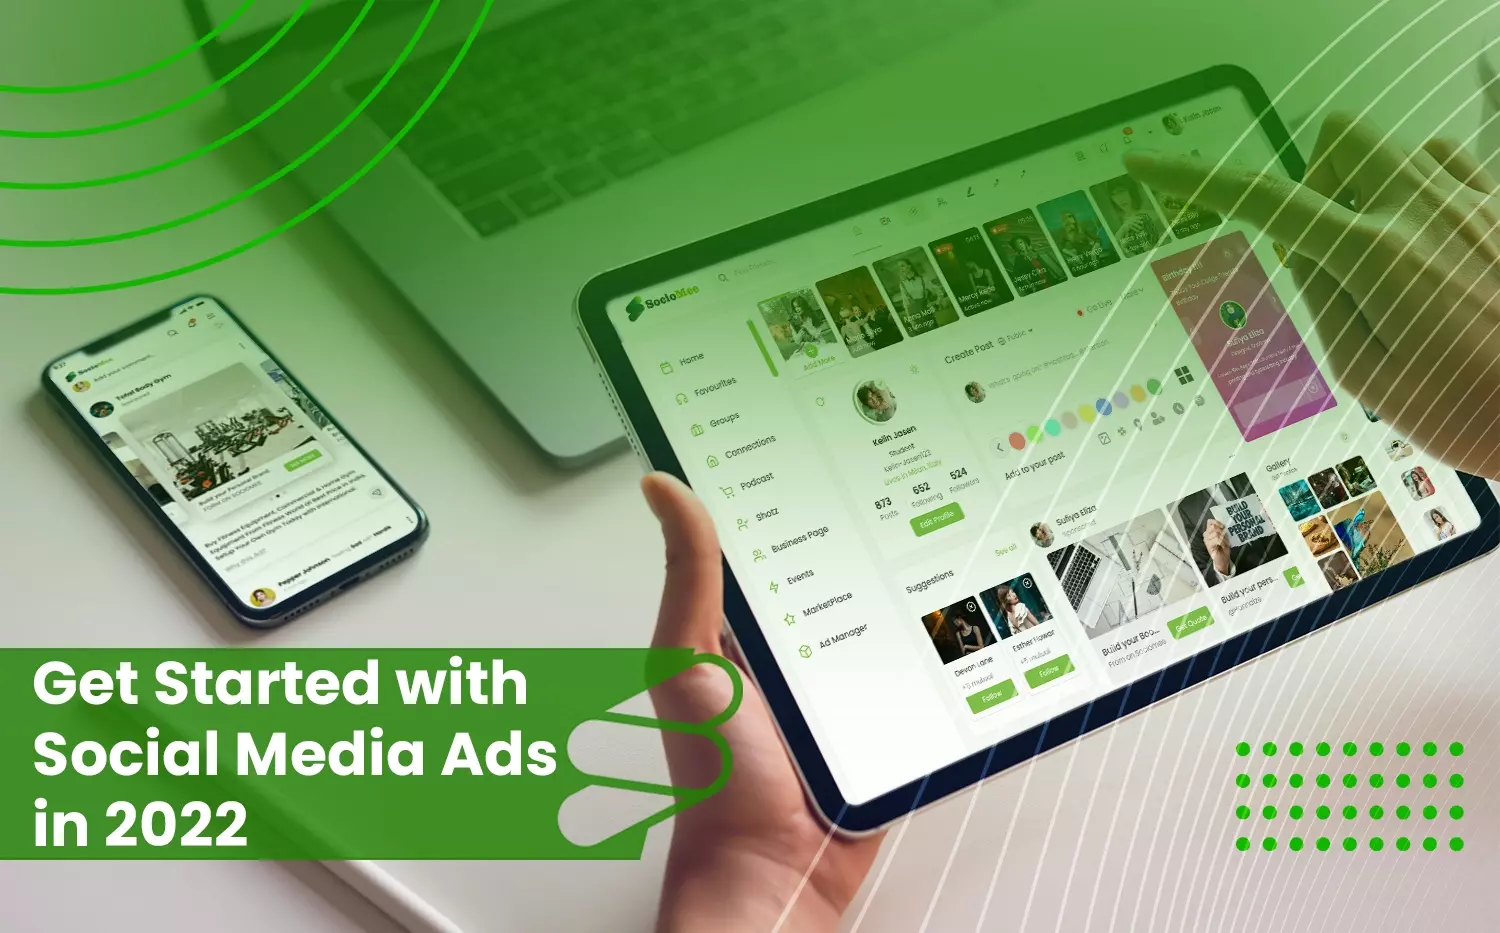 How to Get Started with Social Media Ads in 2022?